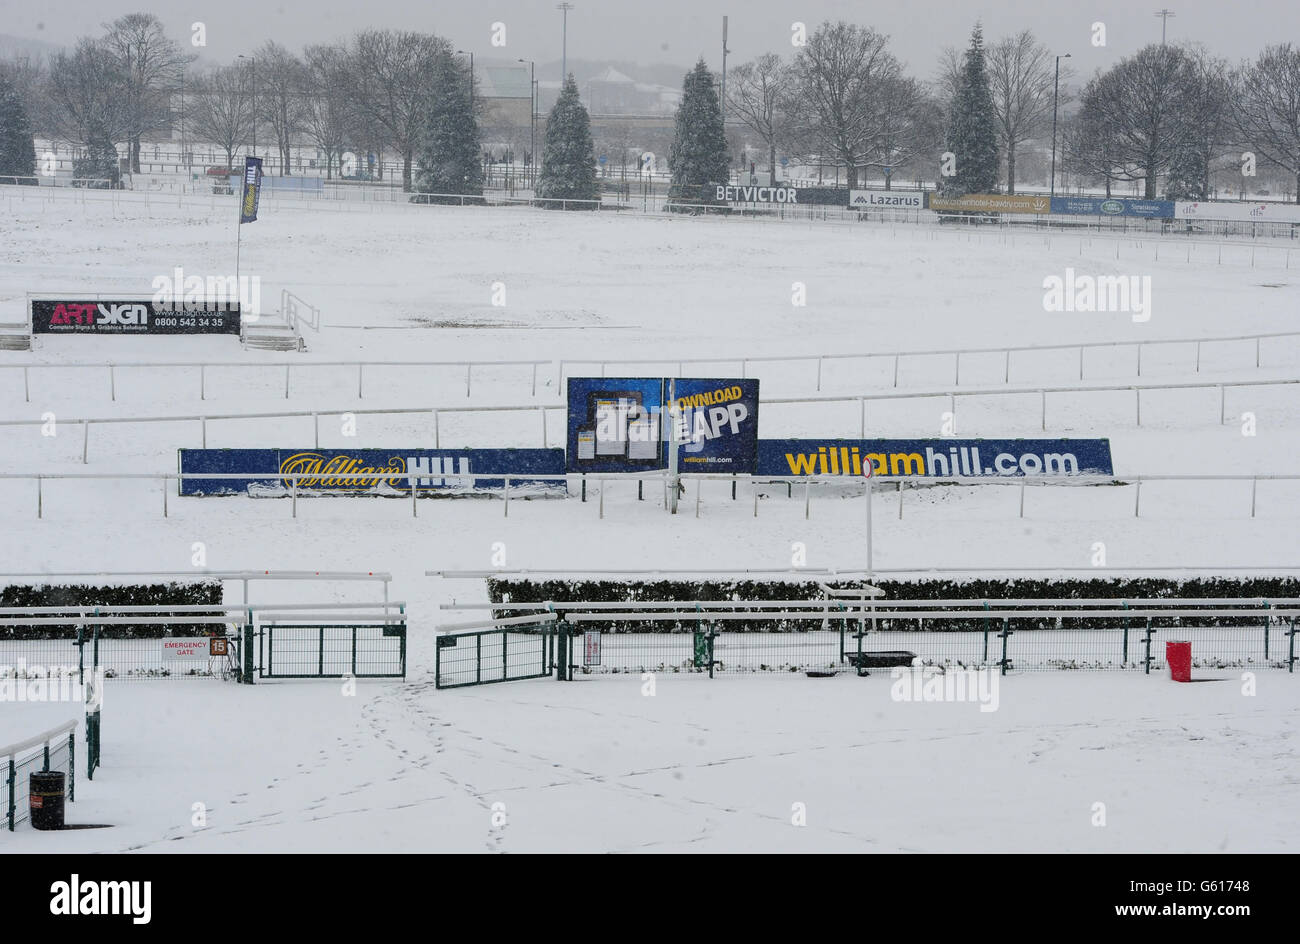 A snowy scene near the winning post as day two of the William Hill Lincoln Meeting at Doncaster Racecourse has been cancelled due to snow. during day two of the William Hill Lincoln Meeting at Doncaster Racecourse. Stock Photo